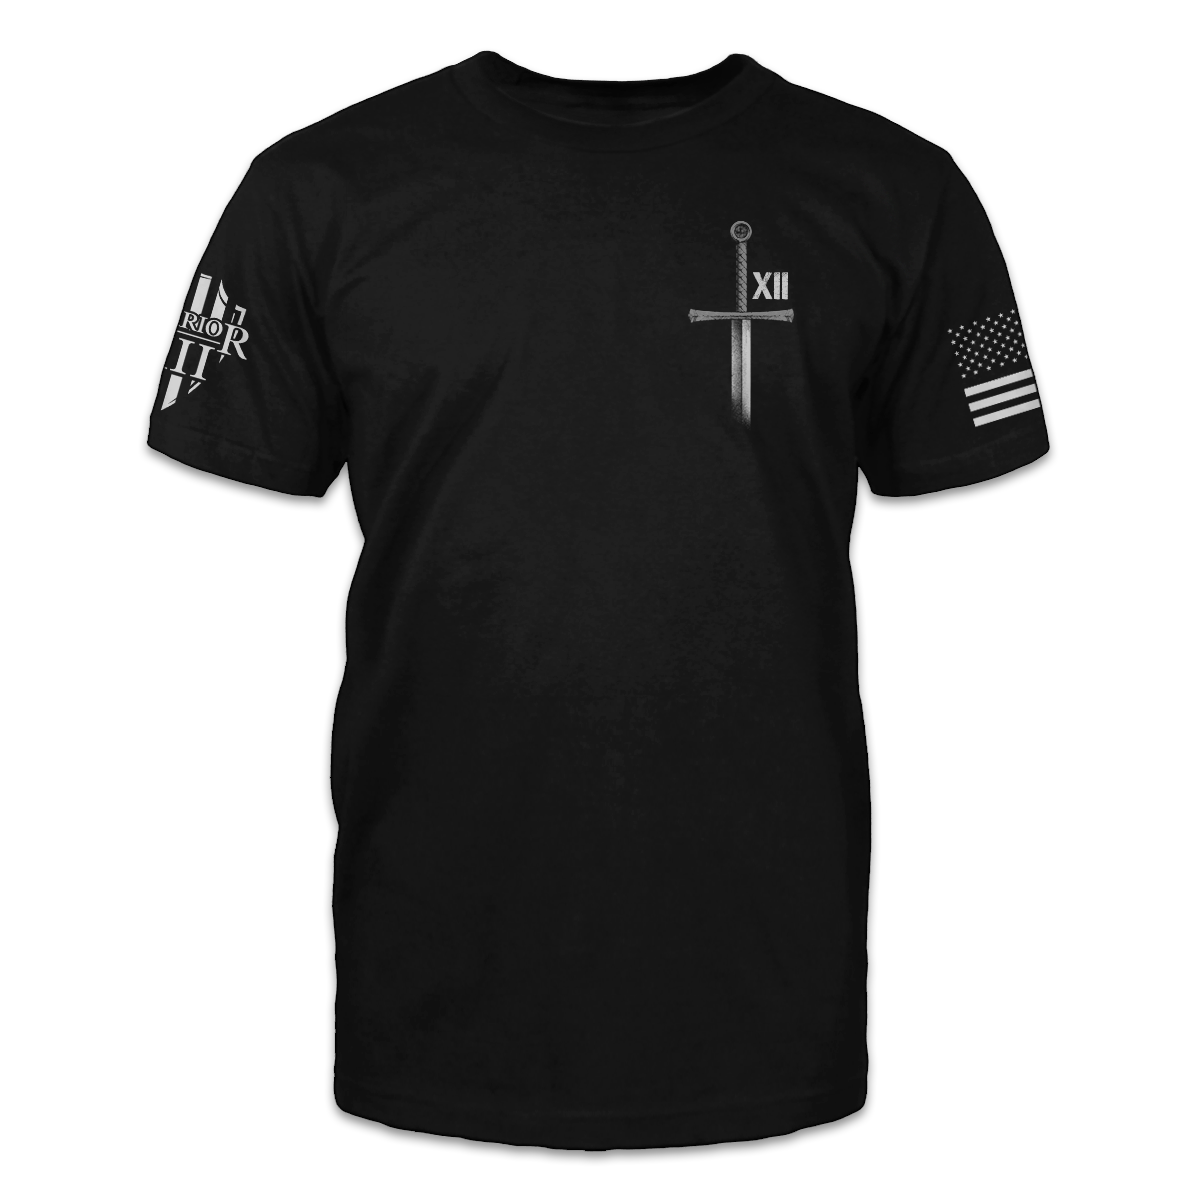 A black t-shirt with a sword printed on the front of the shirt. 